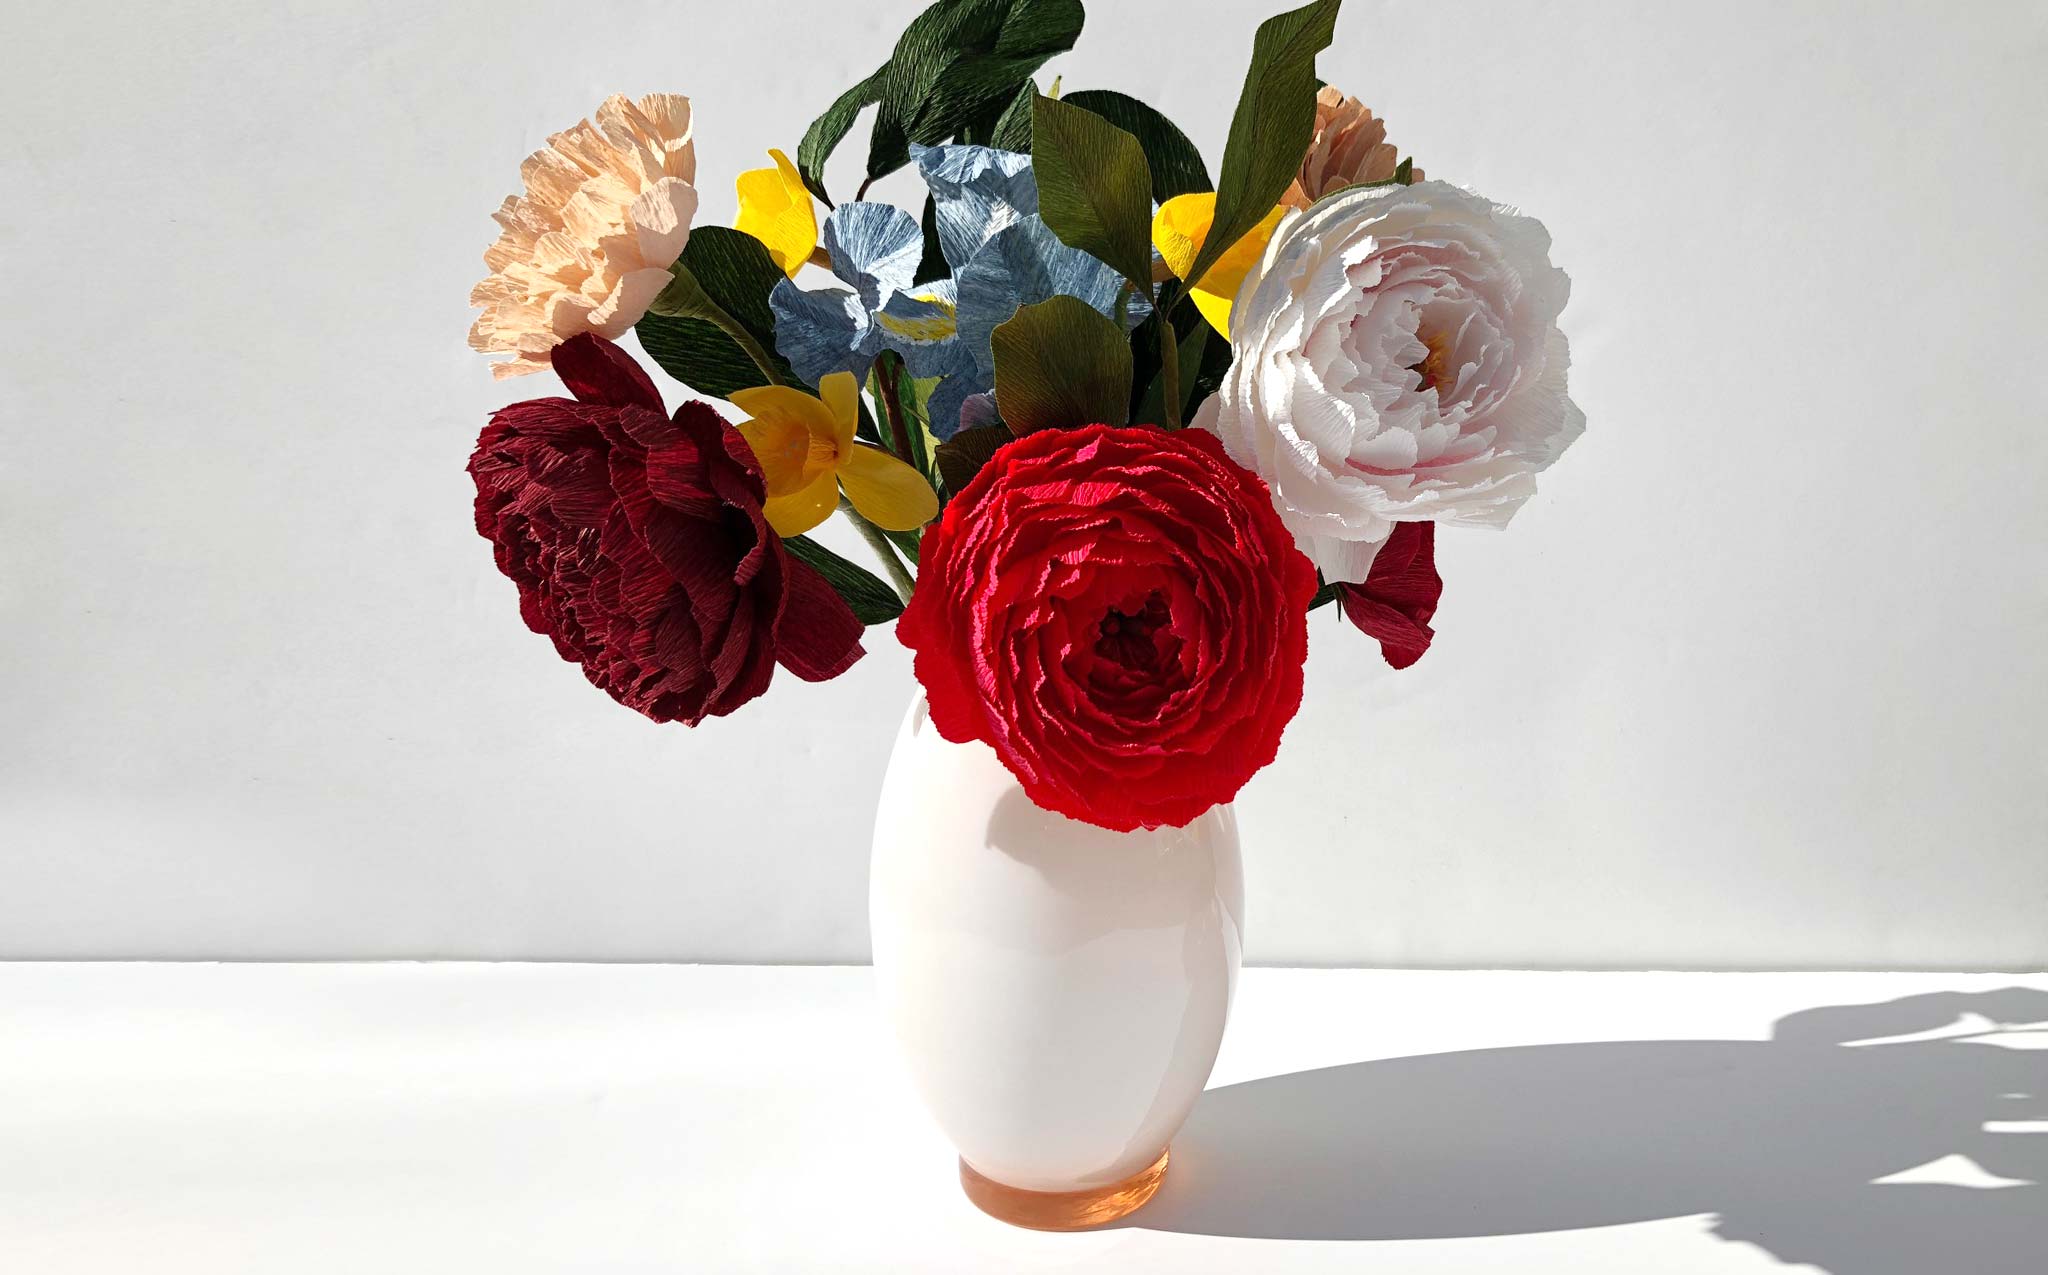 Handmade and Naturally Dyed Floral Arrangement